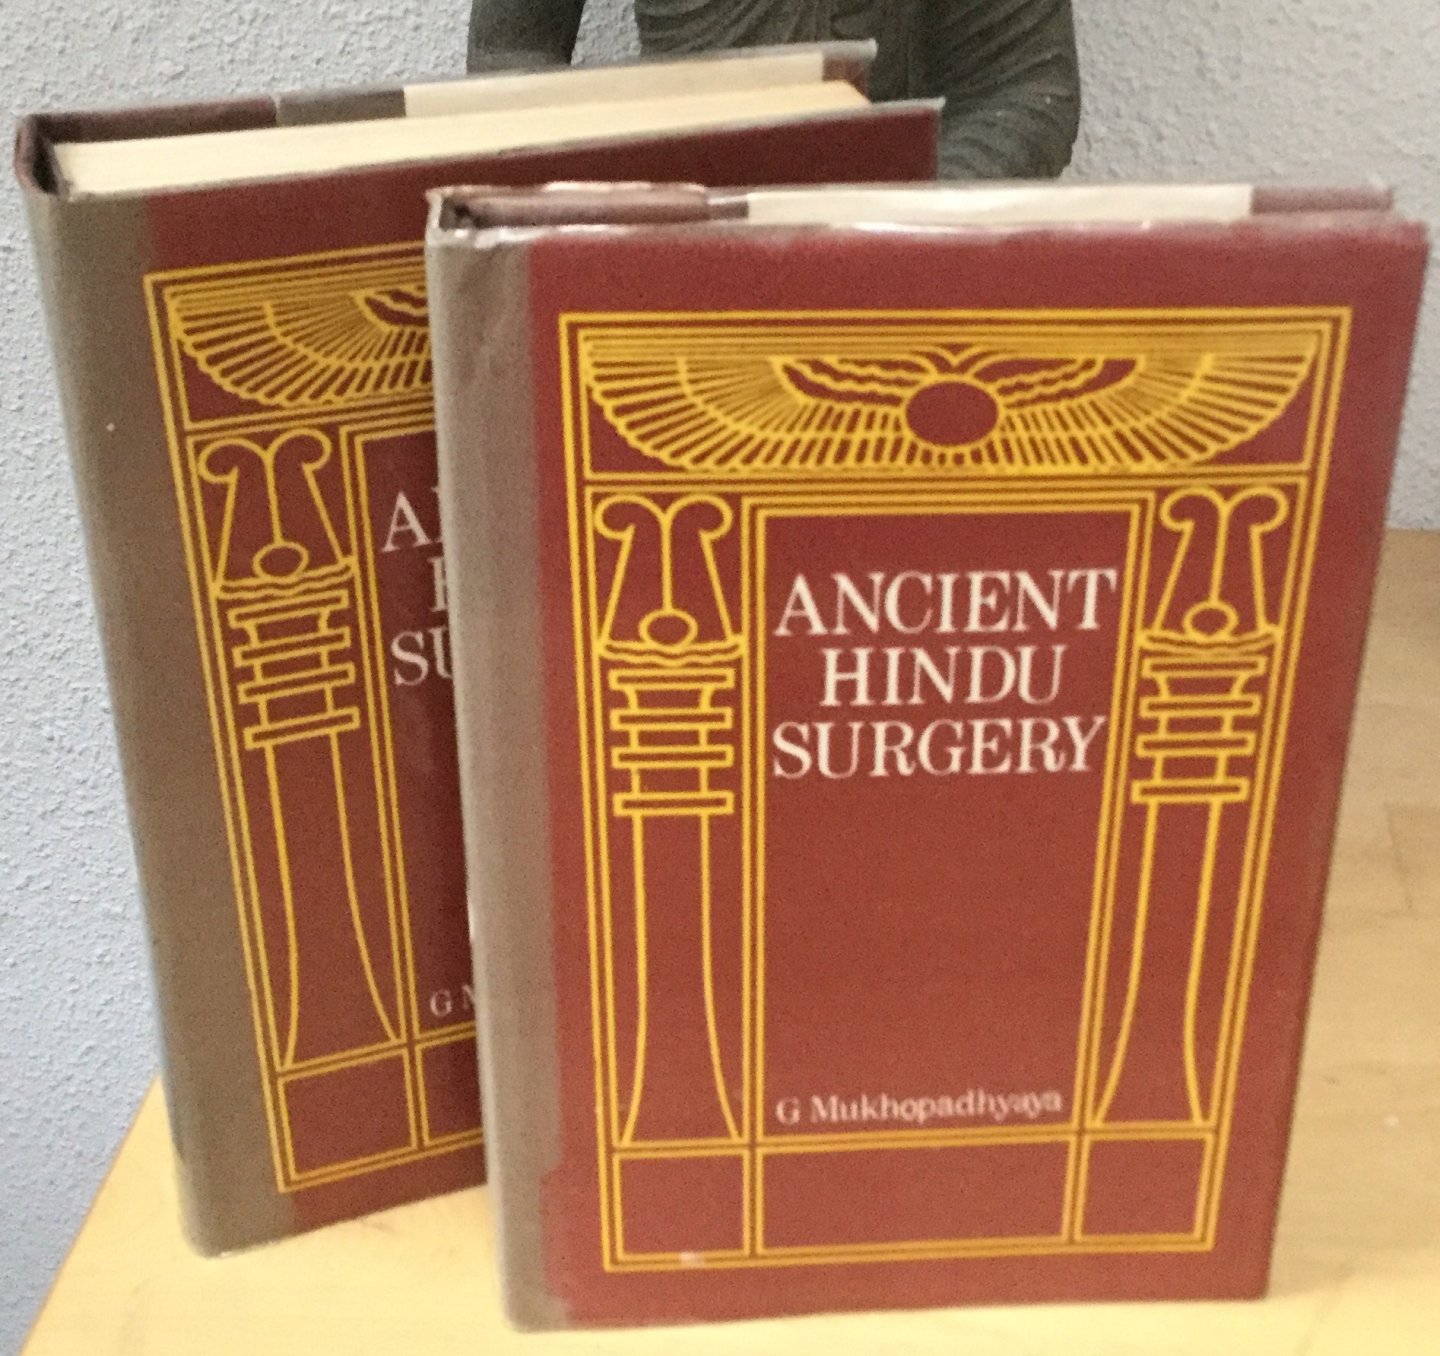 Mukhopadhyaya, Girindranath - Ancient Hindu surgery / Surgical instruments of the Hindus, volume I and II (with a comparative study of the surgical instruments of the Greek, Roman, rab, and the modern European surgeons)